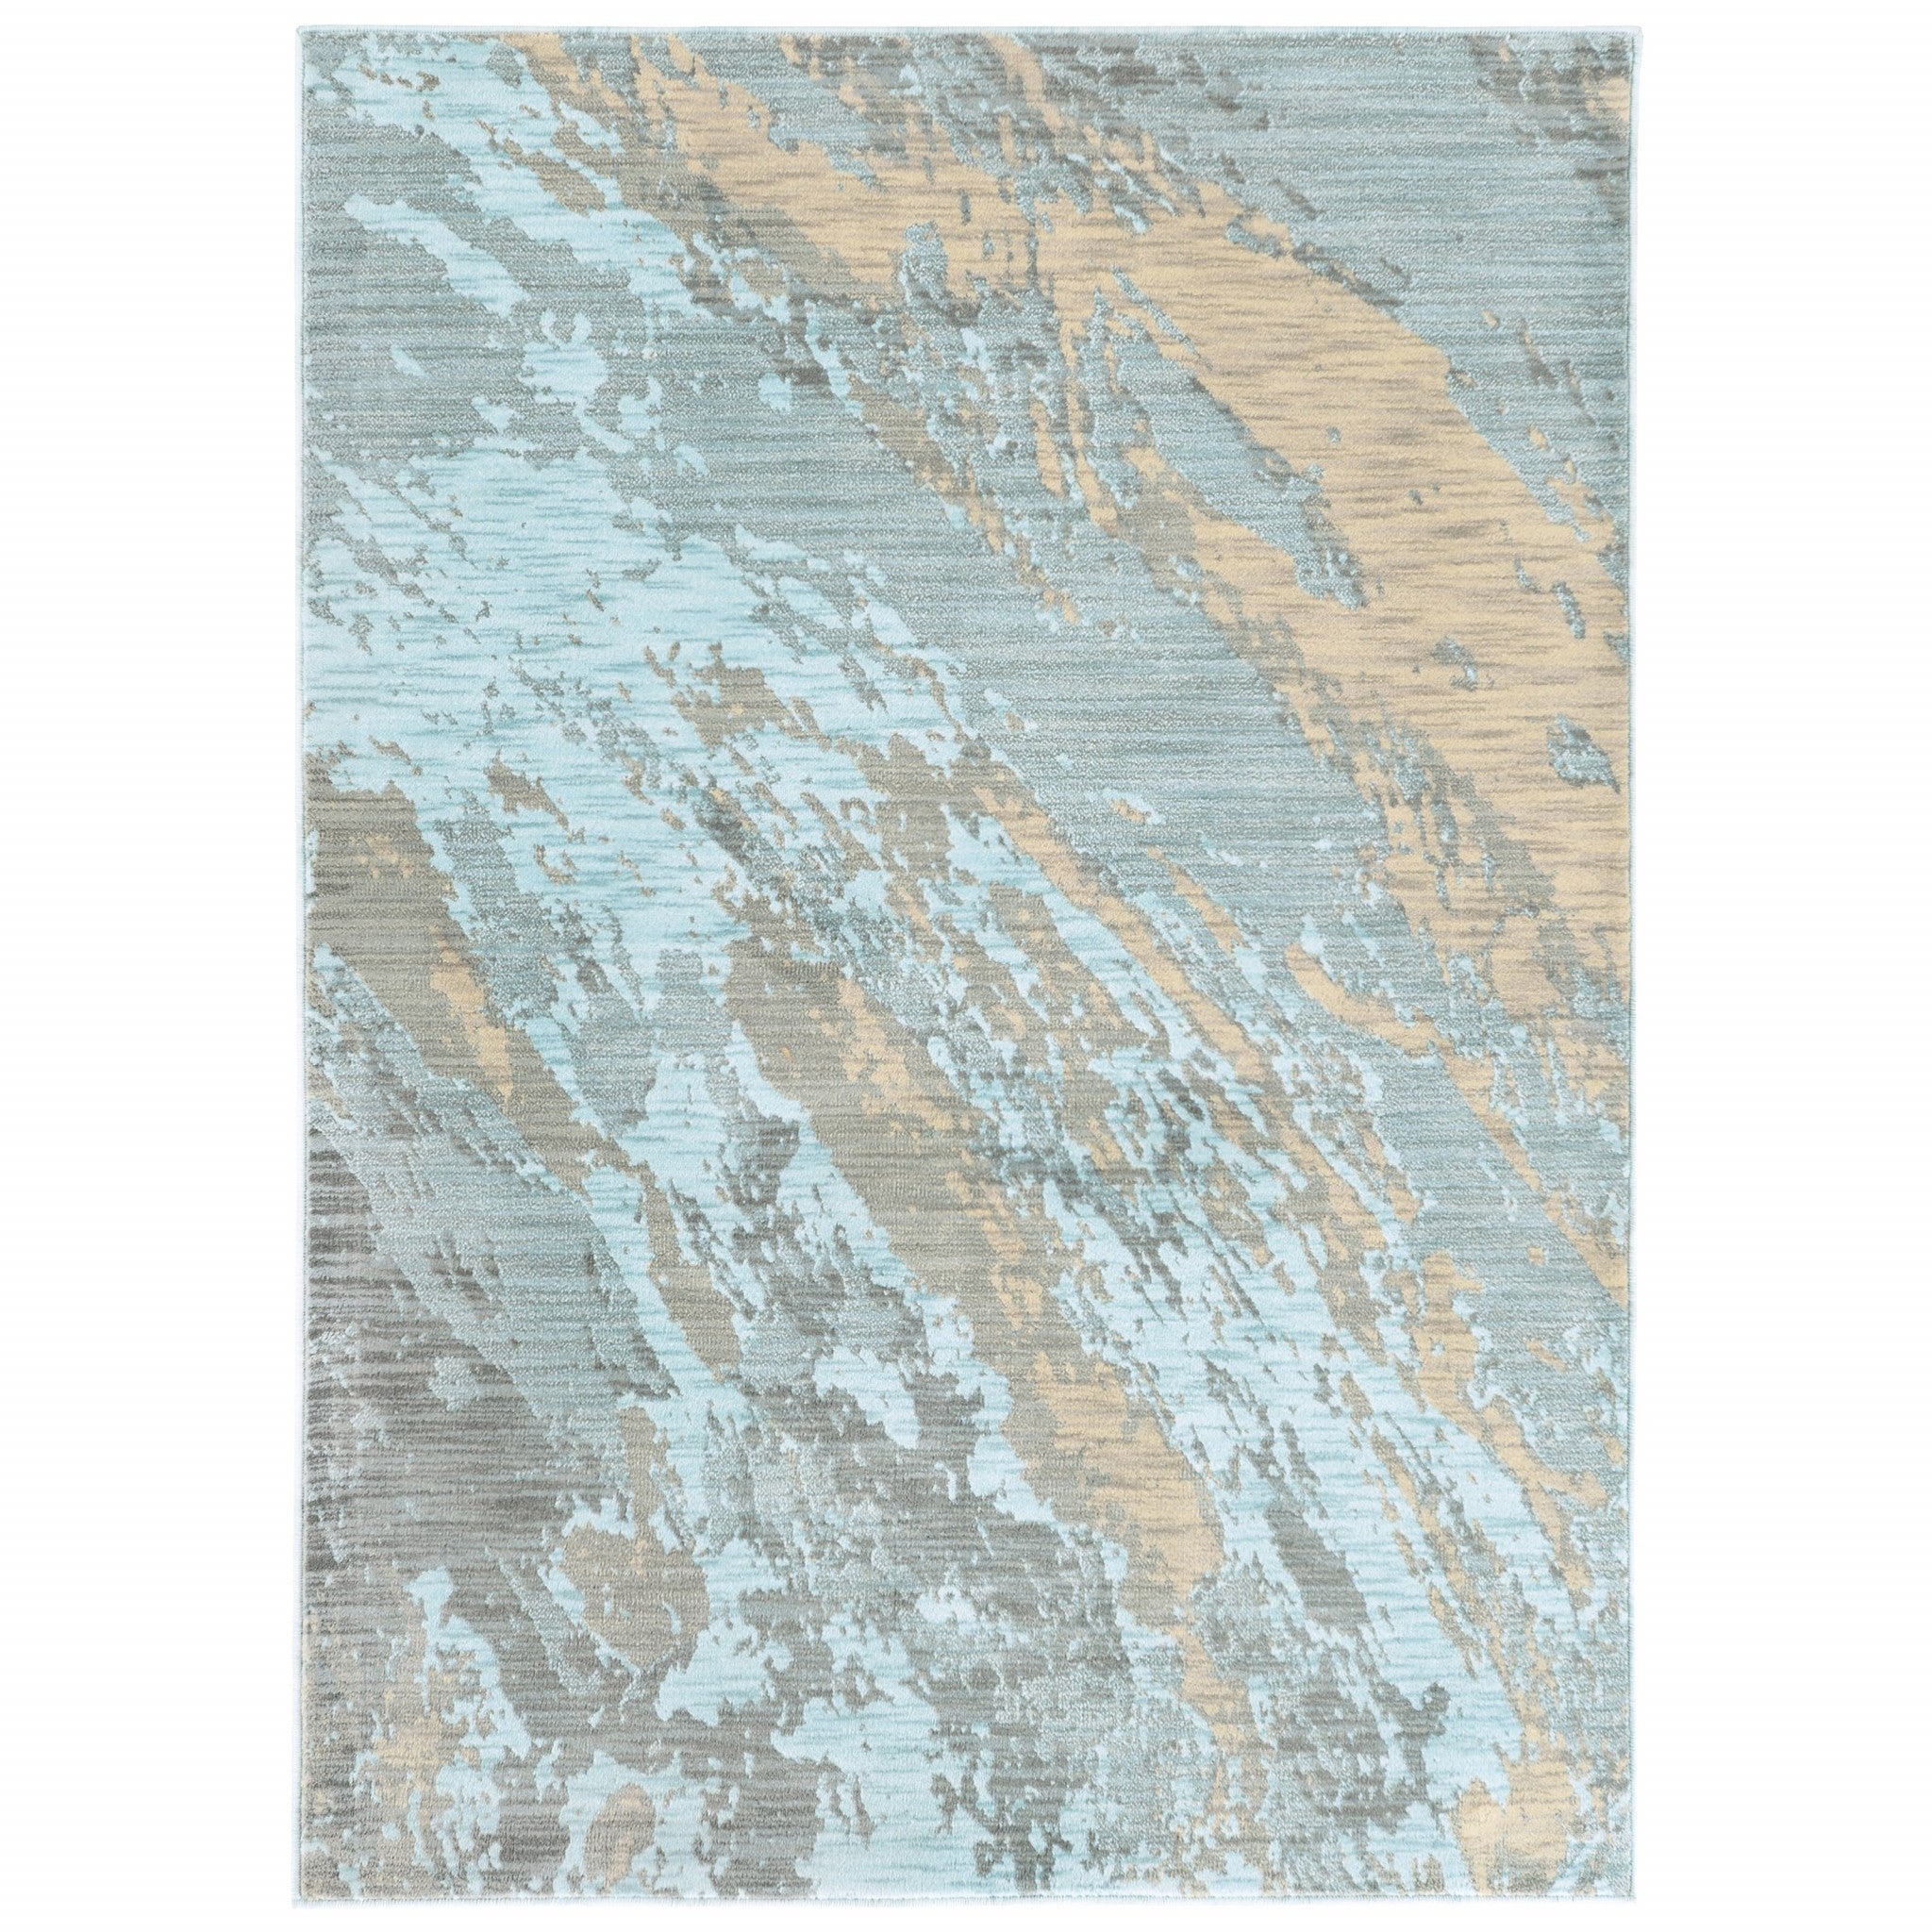 10’X13’ Blue And Gray Abstract Impasto Area Rug